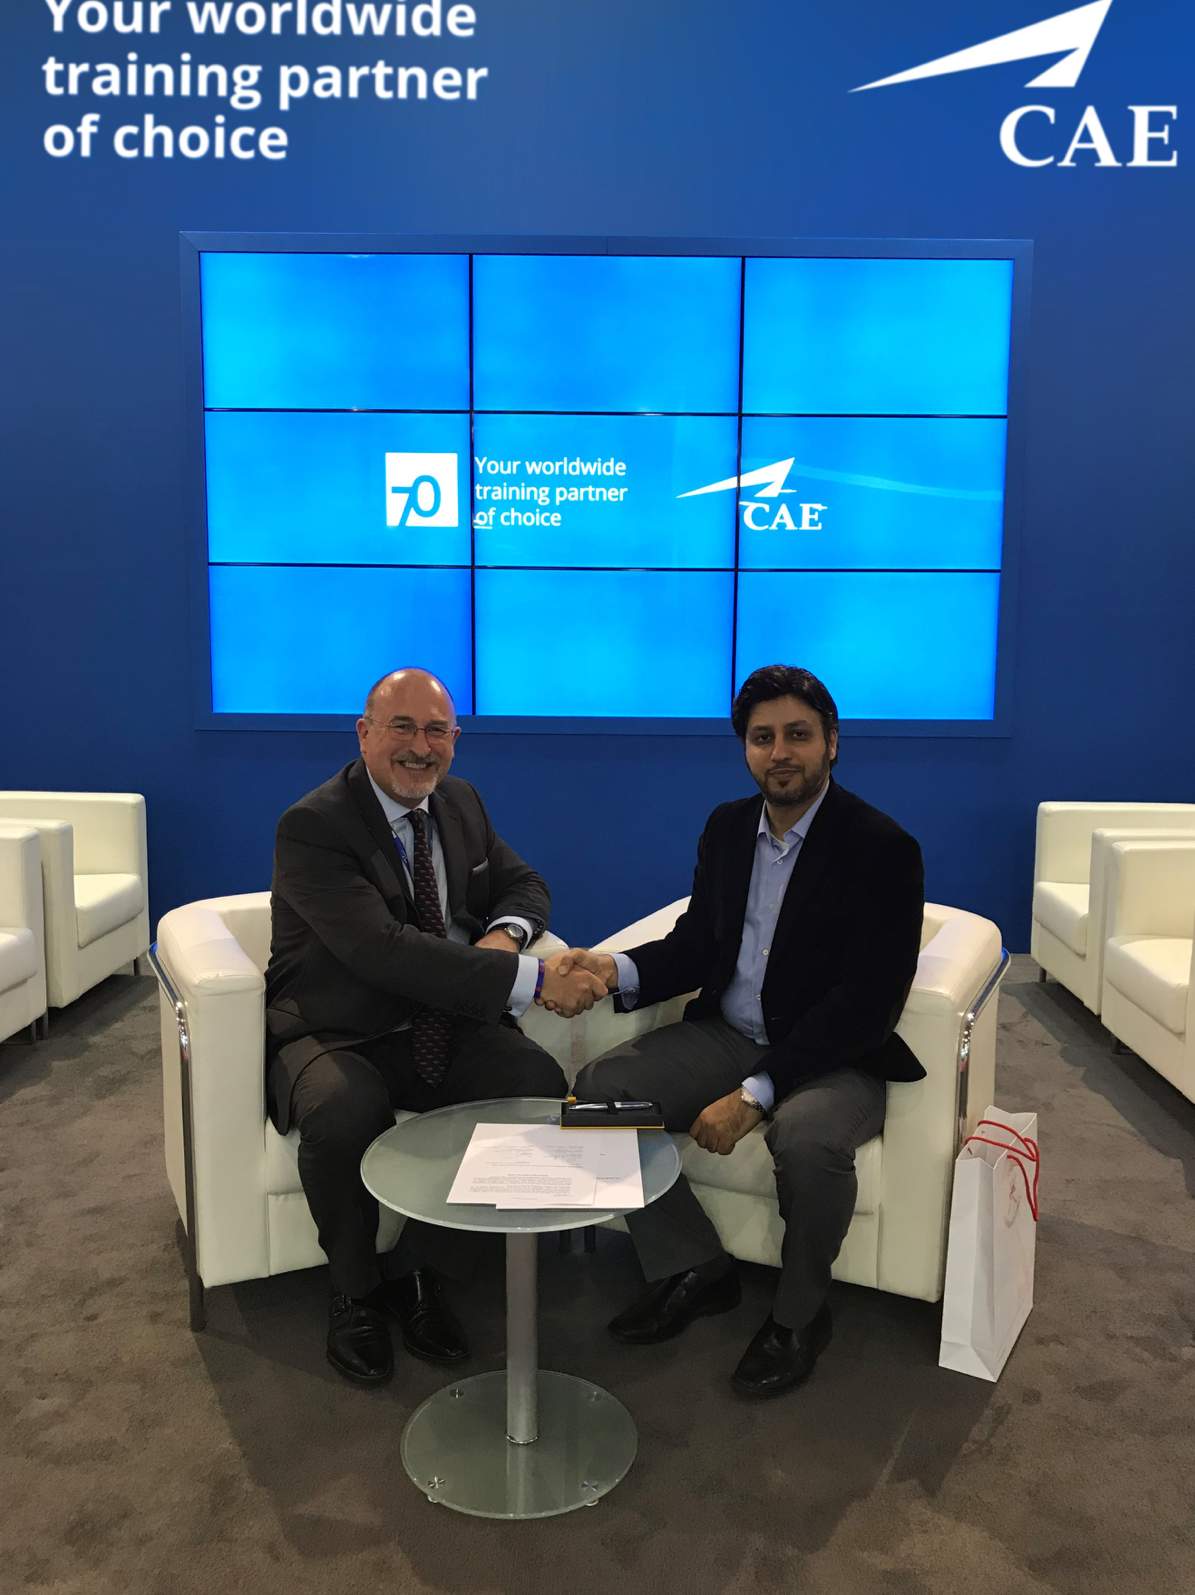 Ian Bell, CAE (left) and Dr. Dhafir Awadh Al Shanfari, OAPFD (right) celebrate the signing of an agr